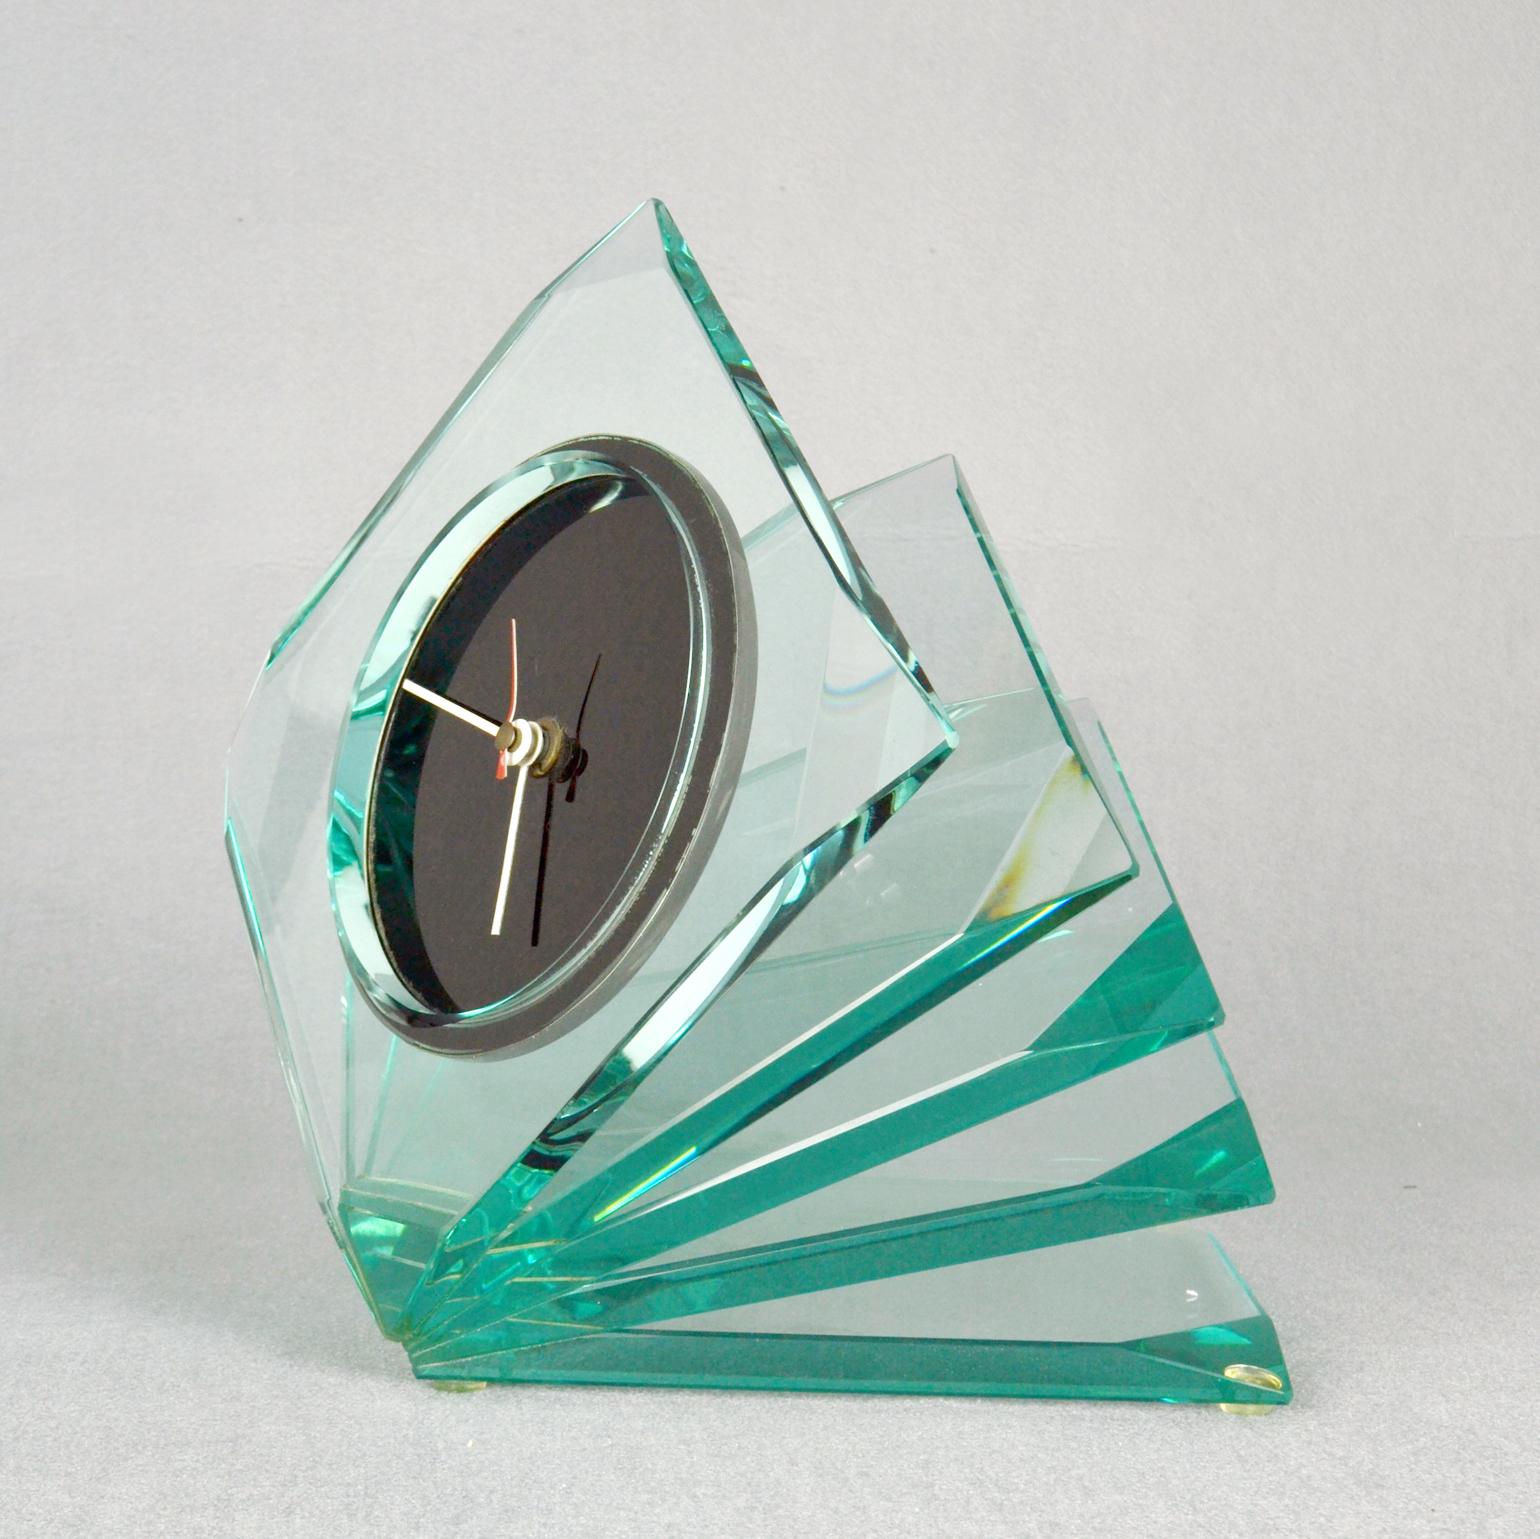 Cristal glass clock attributed to Fontana Arte, Italy 1970's, is made of 5 segments of finely cut glass welded together. They are positioned like a fan in an upwards direction. The clock is run by a battery. 